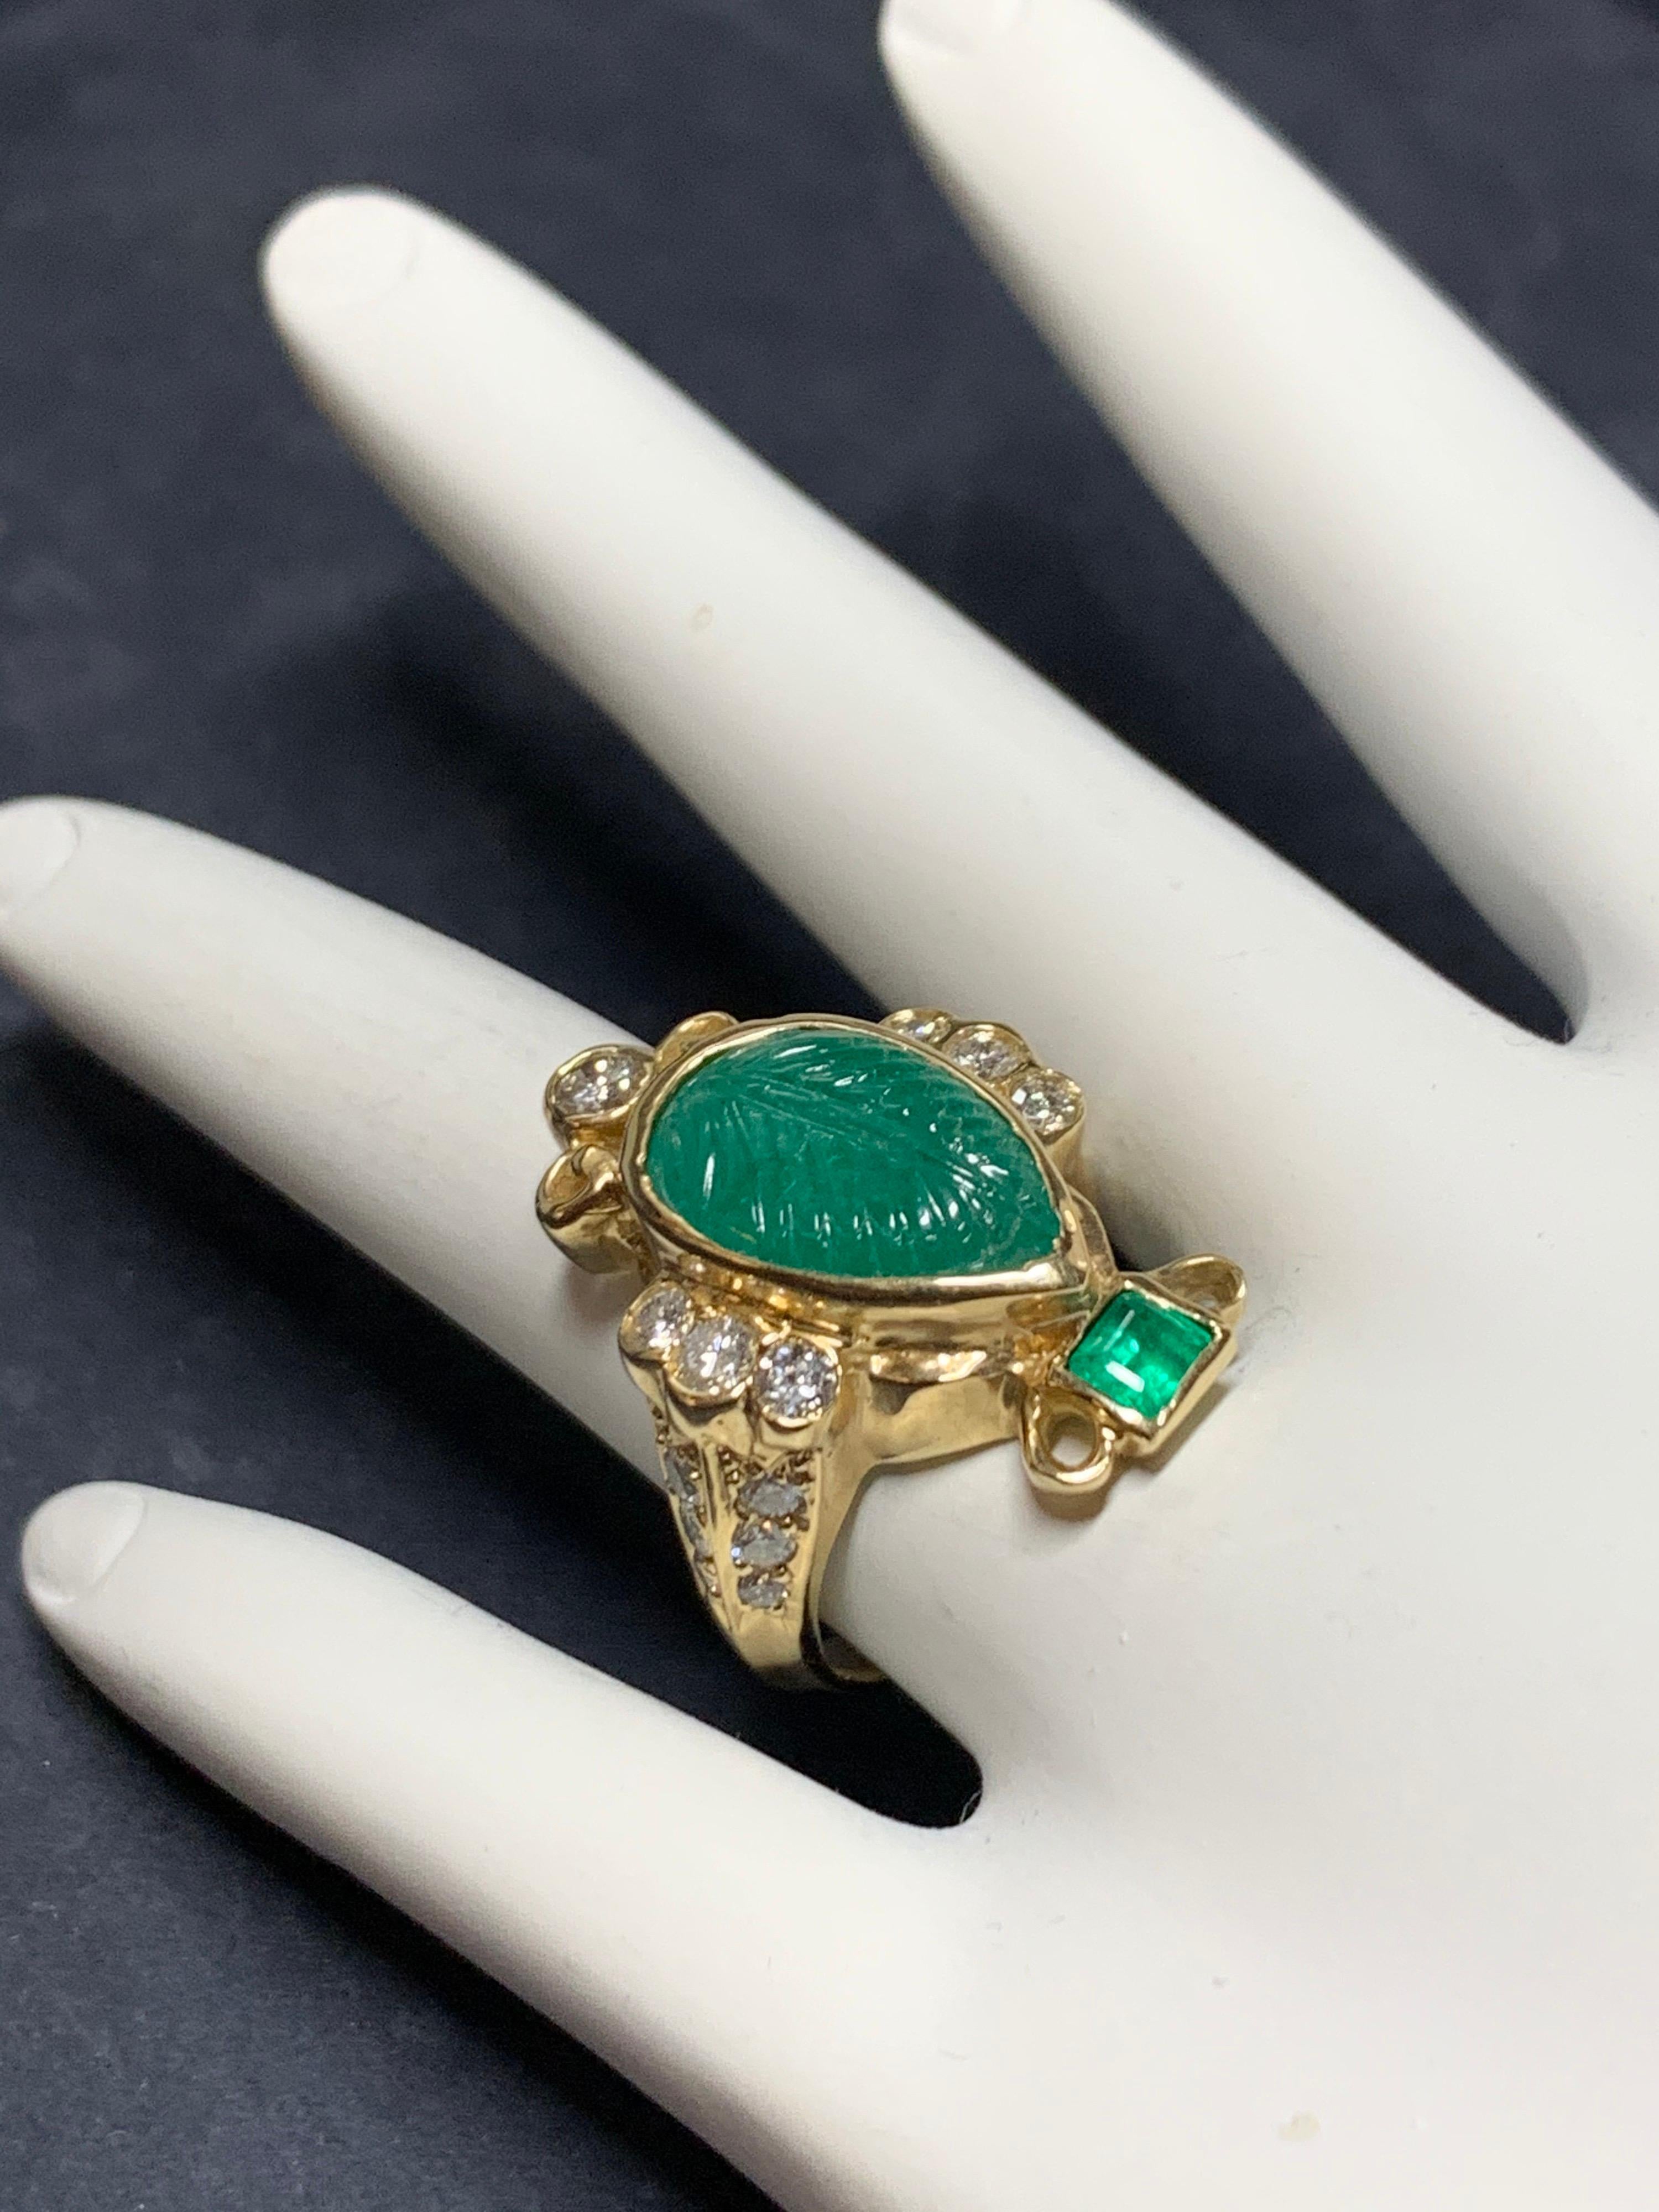 Women's Retro Gold Ring 6 Carat Natural Carved Emerald, Diamond Cocktail Ring circa 1950 For Sale